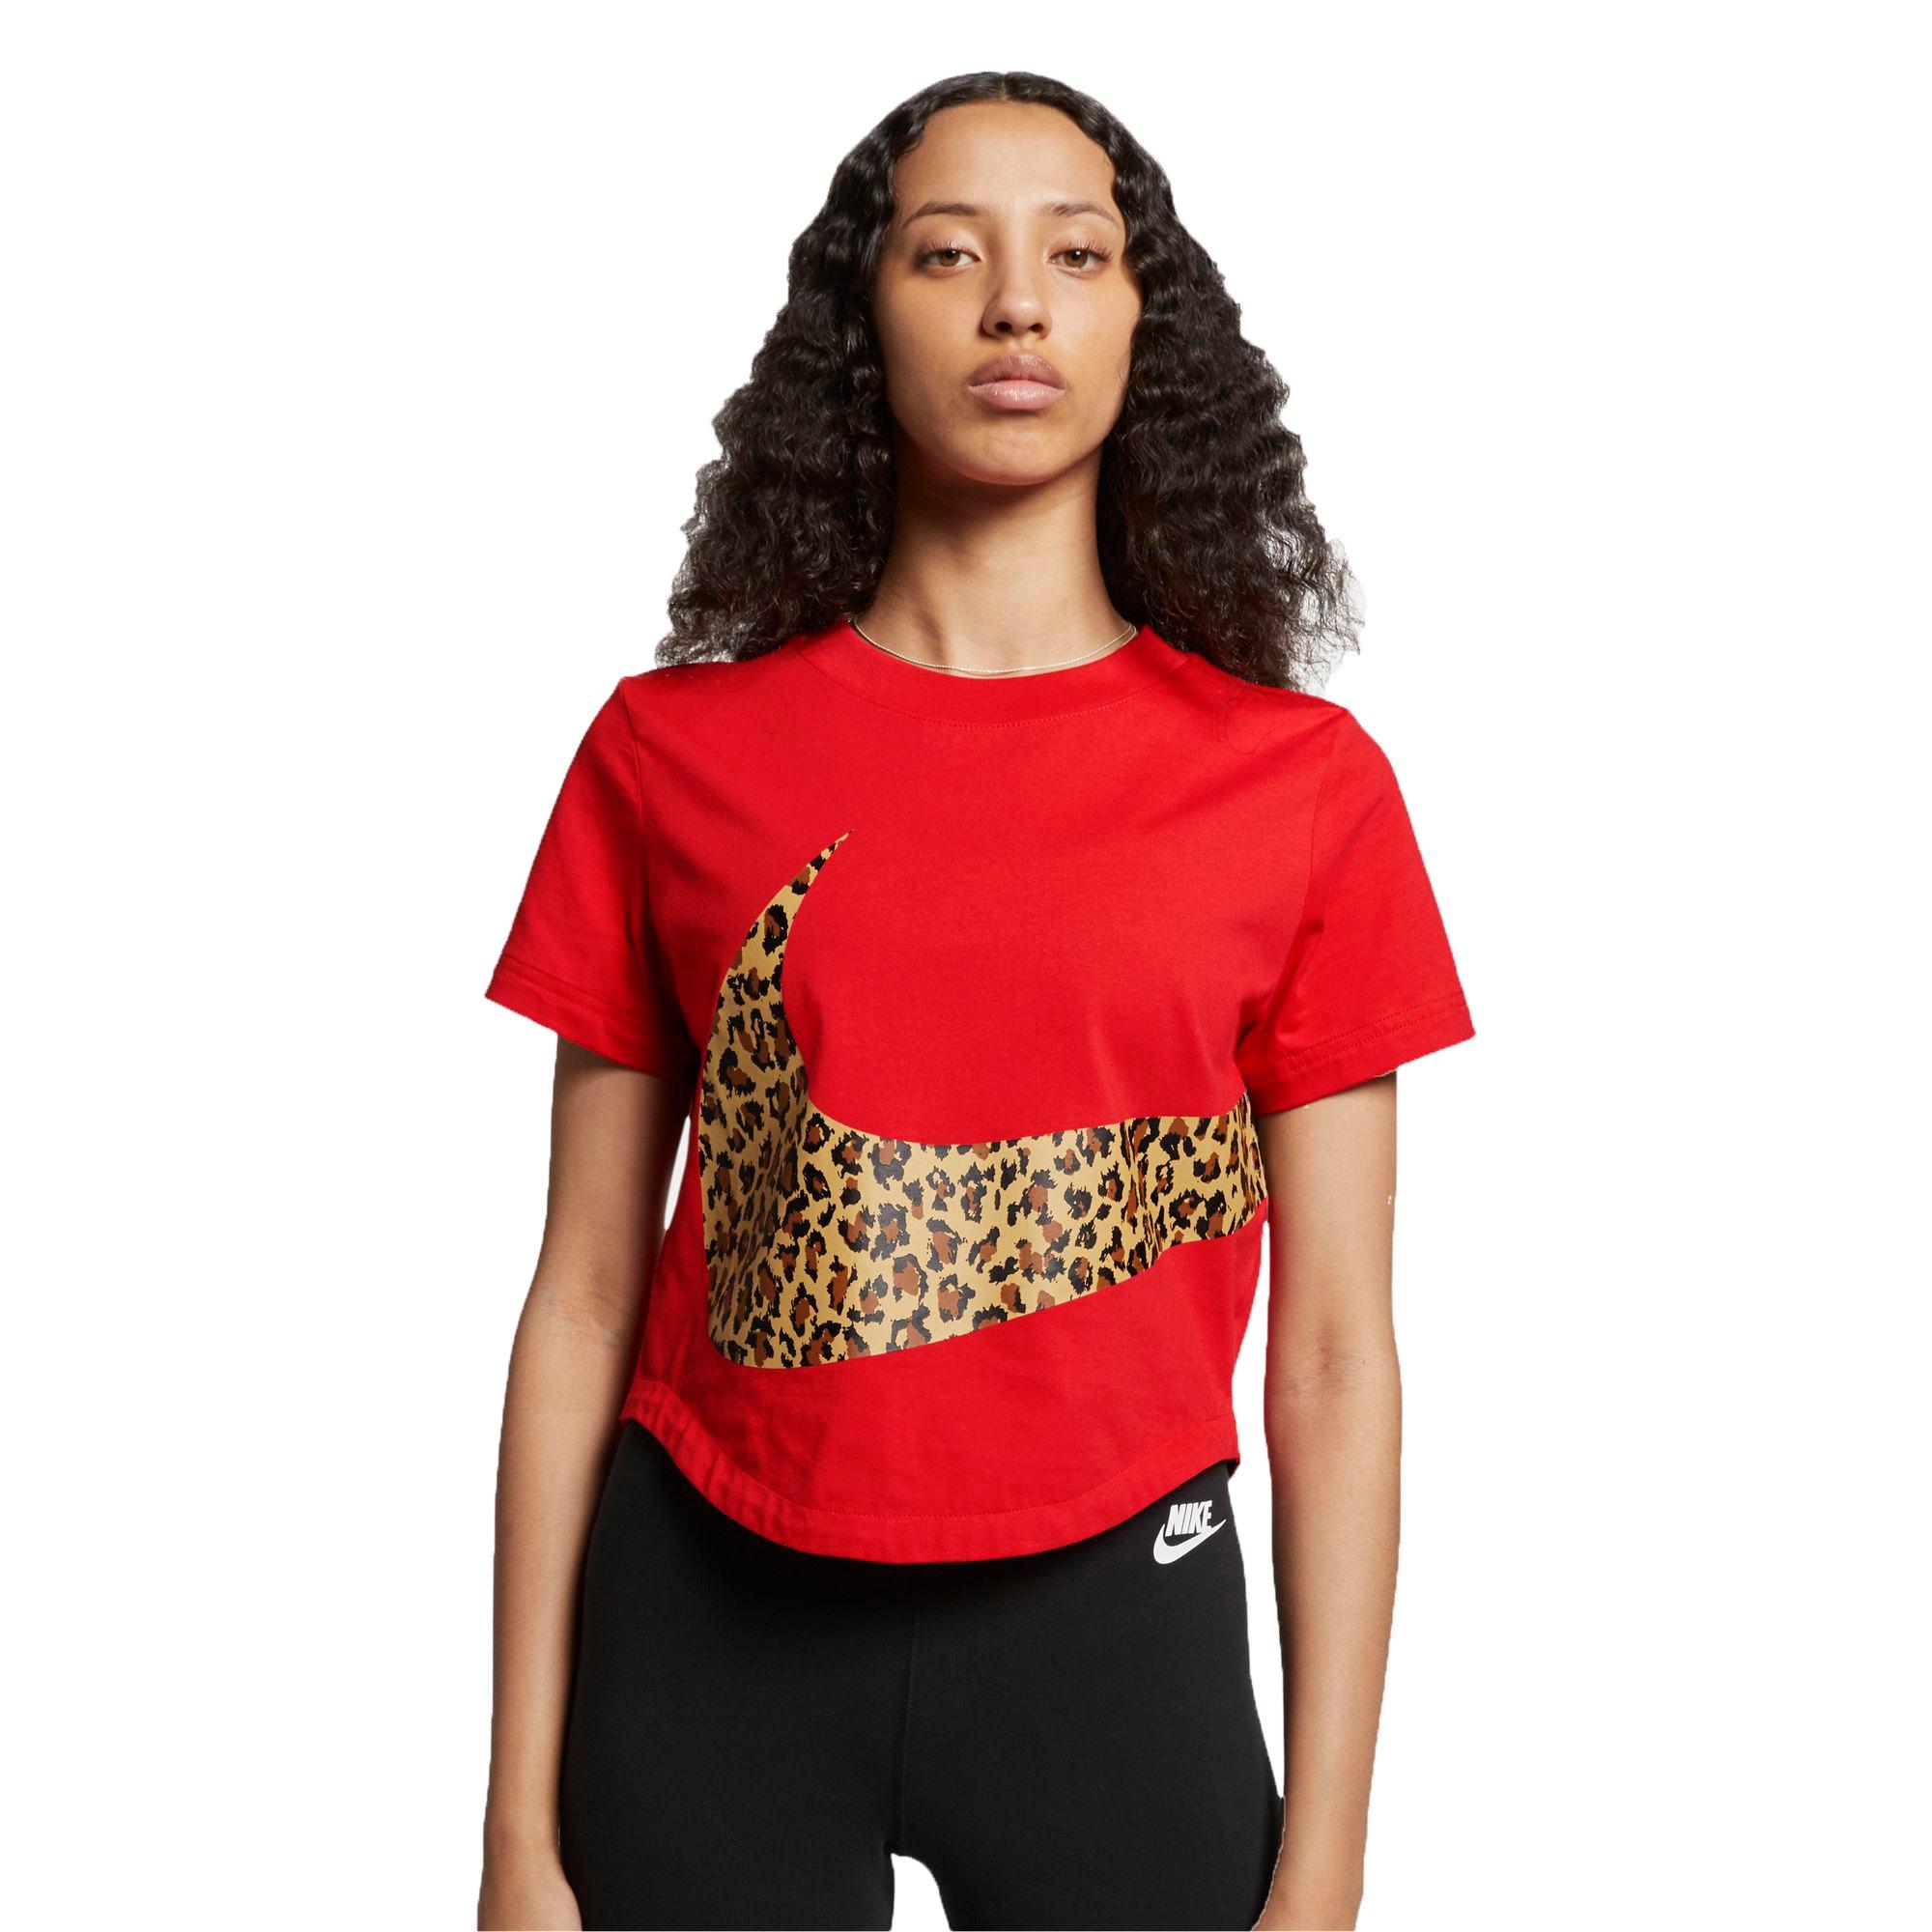 red and leopard nike shirt